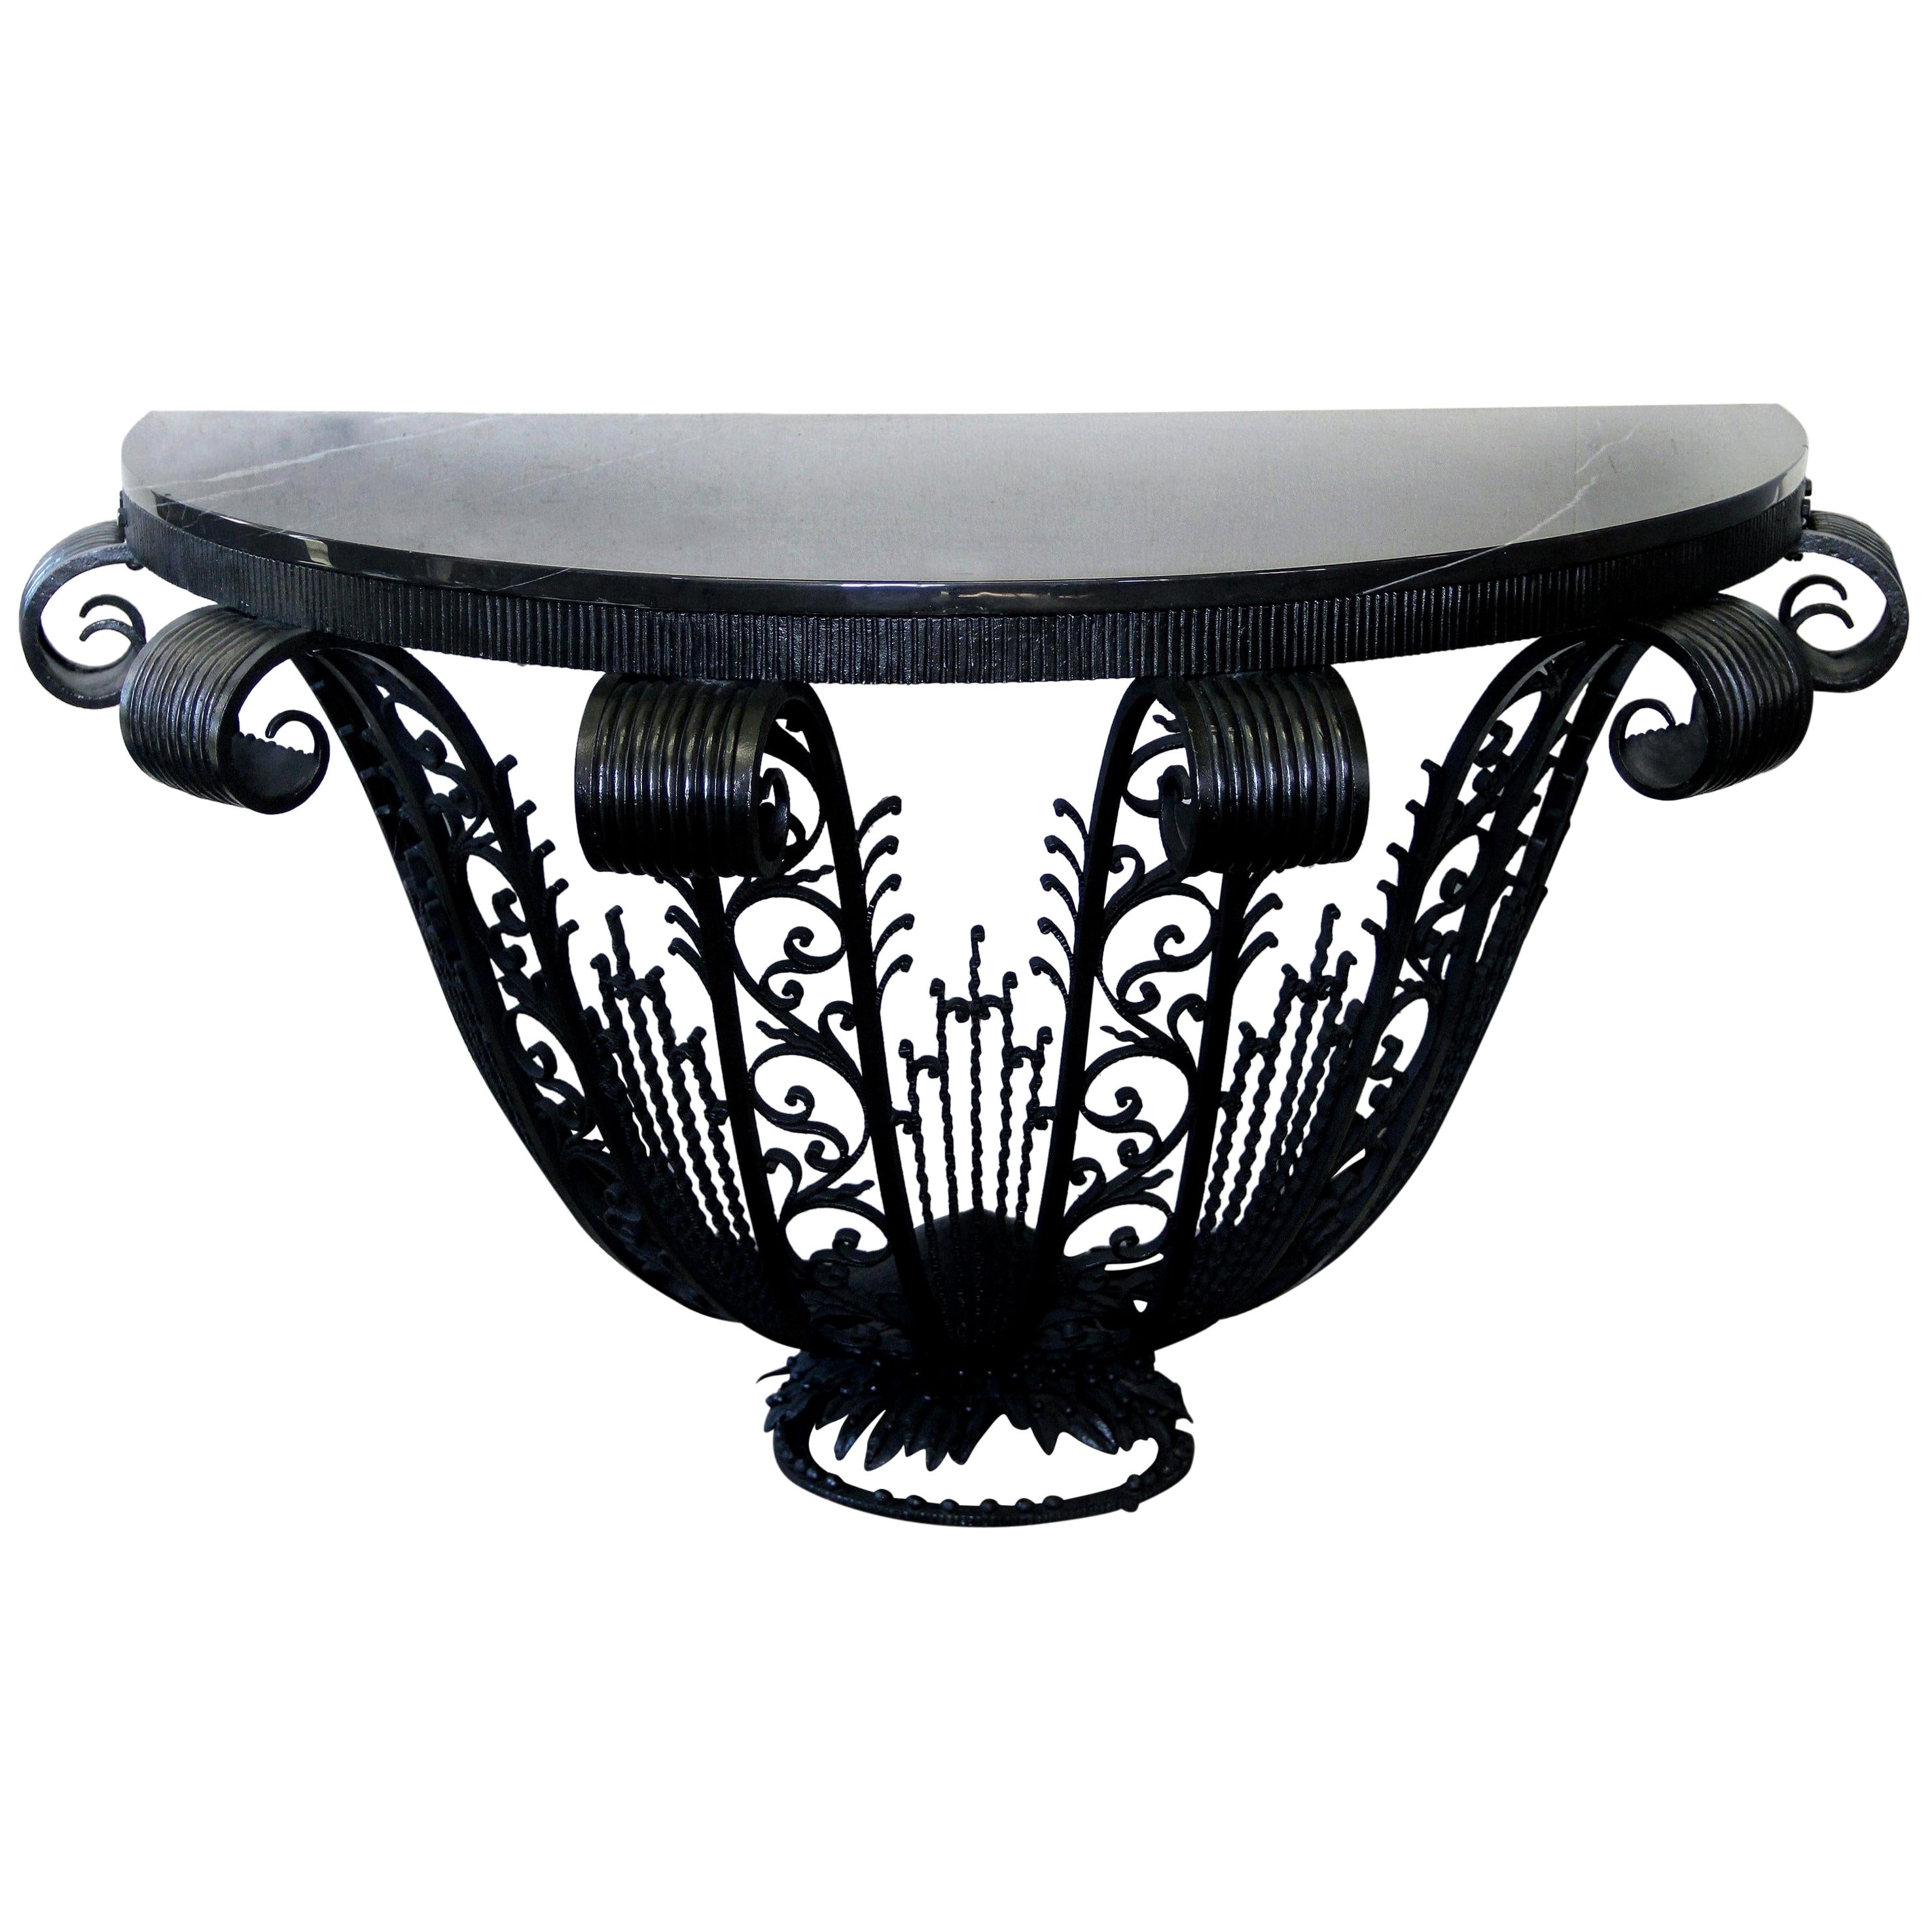 Exceptional Early 20th Century Cast Wrought Marble-Top Art Deco Console For Sale